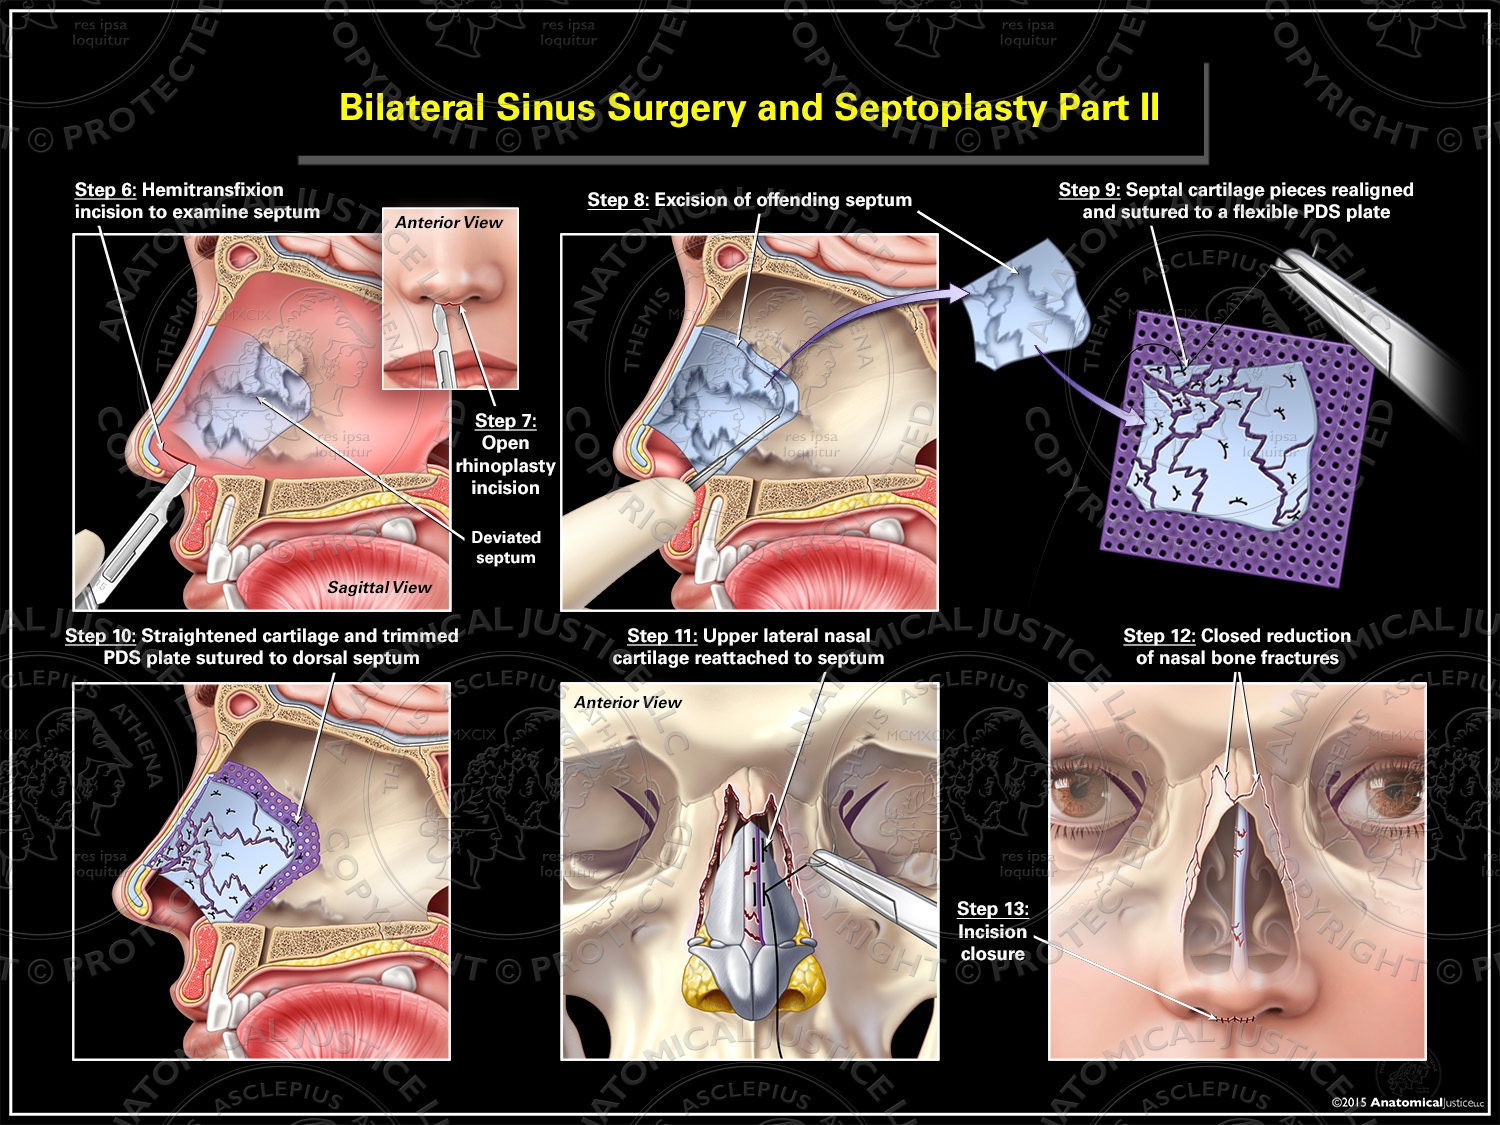 Tegne forsikring ulv Assimilate Bilateral Sinus Surgery and Septoplasty